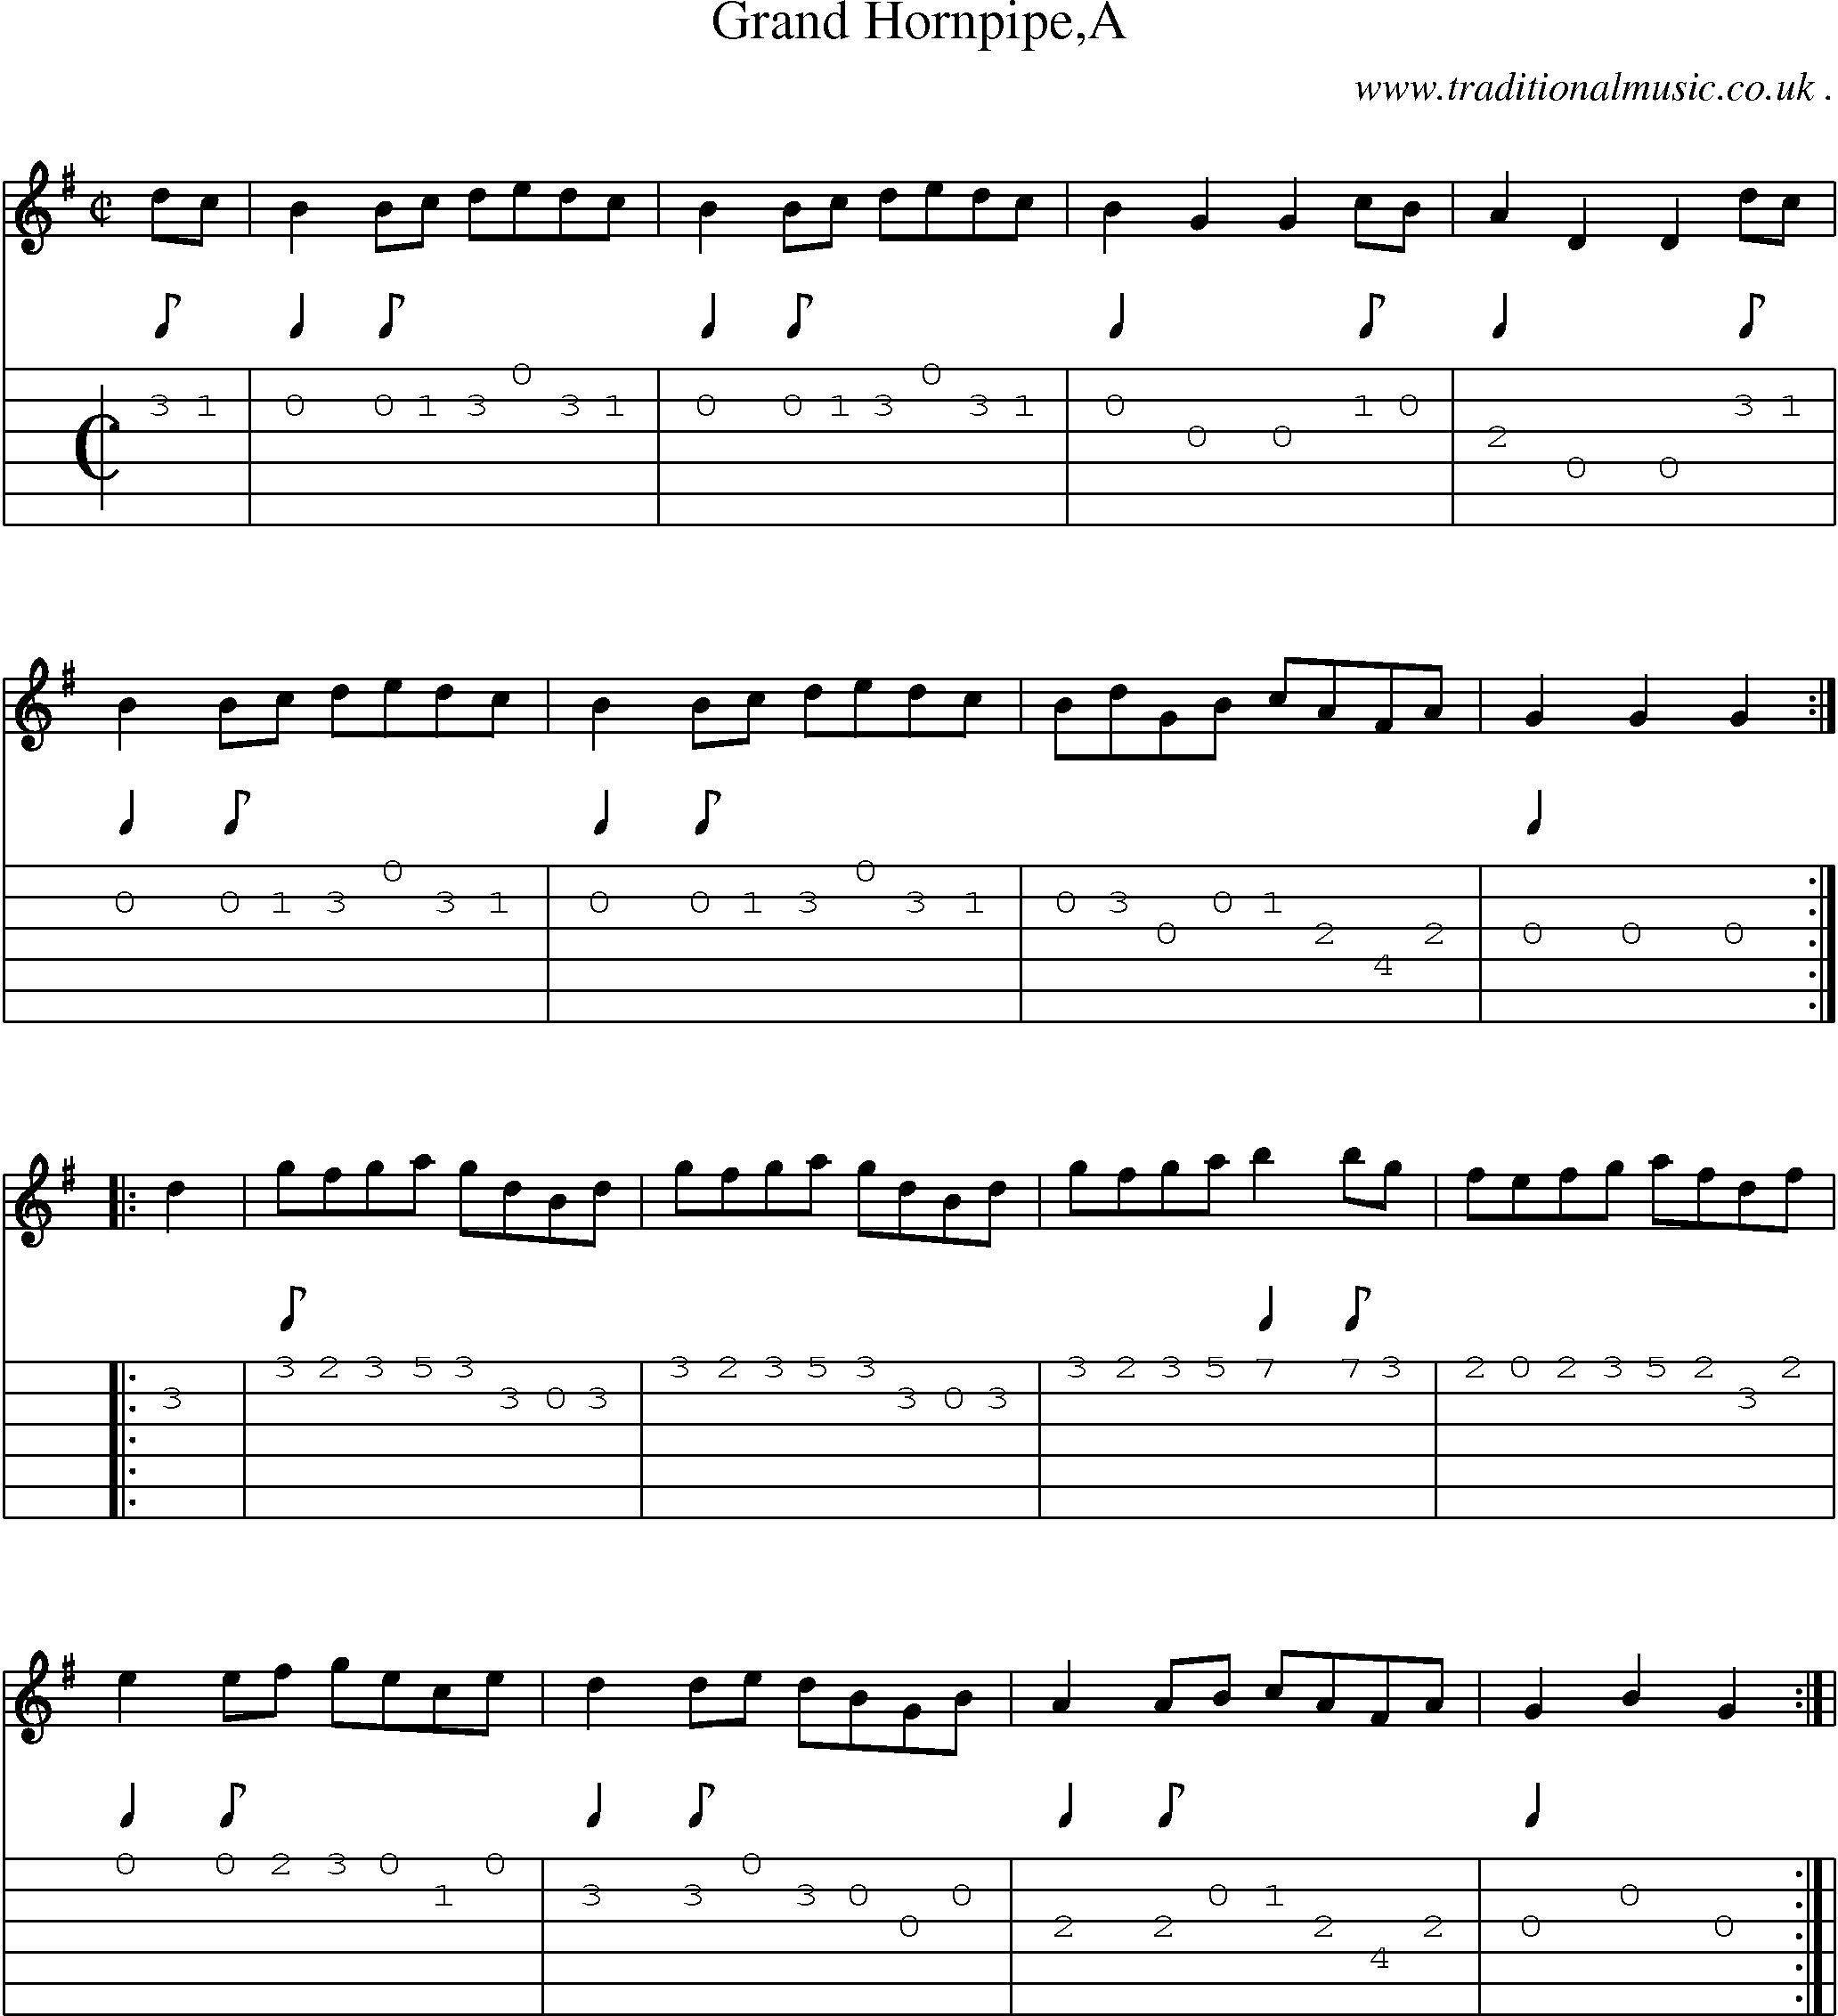 Sheet-Music and Guitar Tabs for Grand Hornpipea